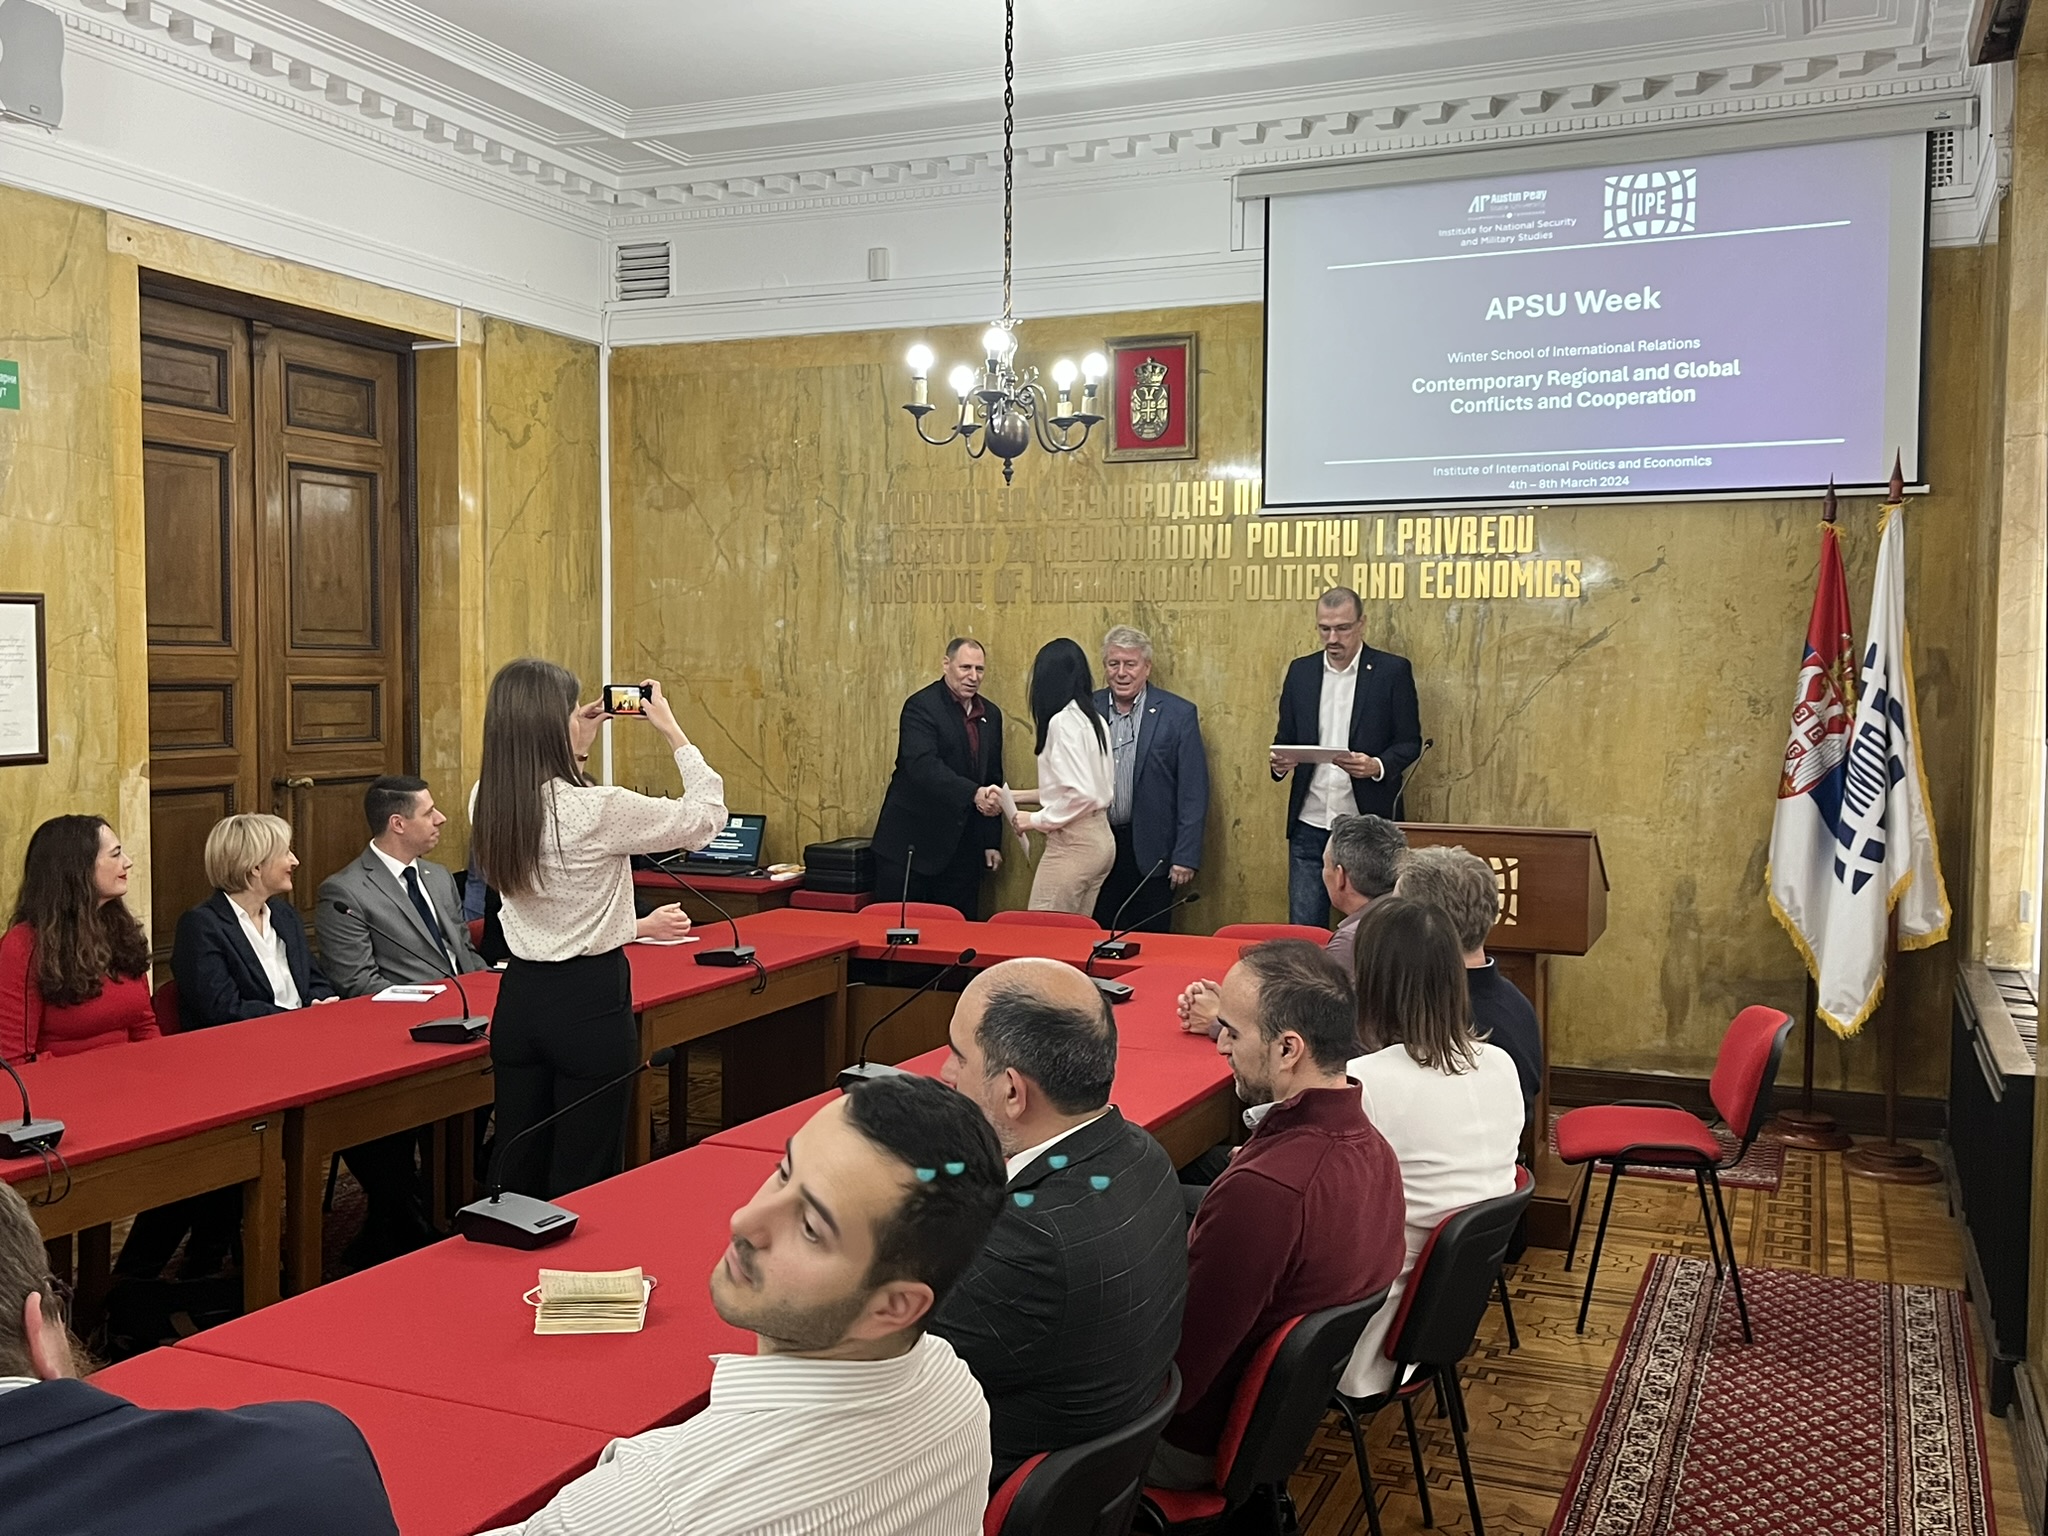 INSMS Director Dr. Rich Mifsud congratulates a student on the successful completion of APSU Week. Mifsud is flanked by IIPE Director Dr. Branislav Đorđević and IIPE Senior Researcher Dr. Vladimir Trapara as members of the U.S. Embassy delegation look on to the left.